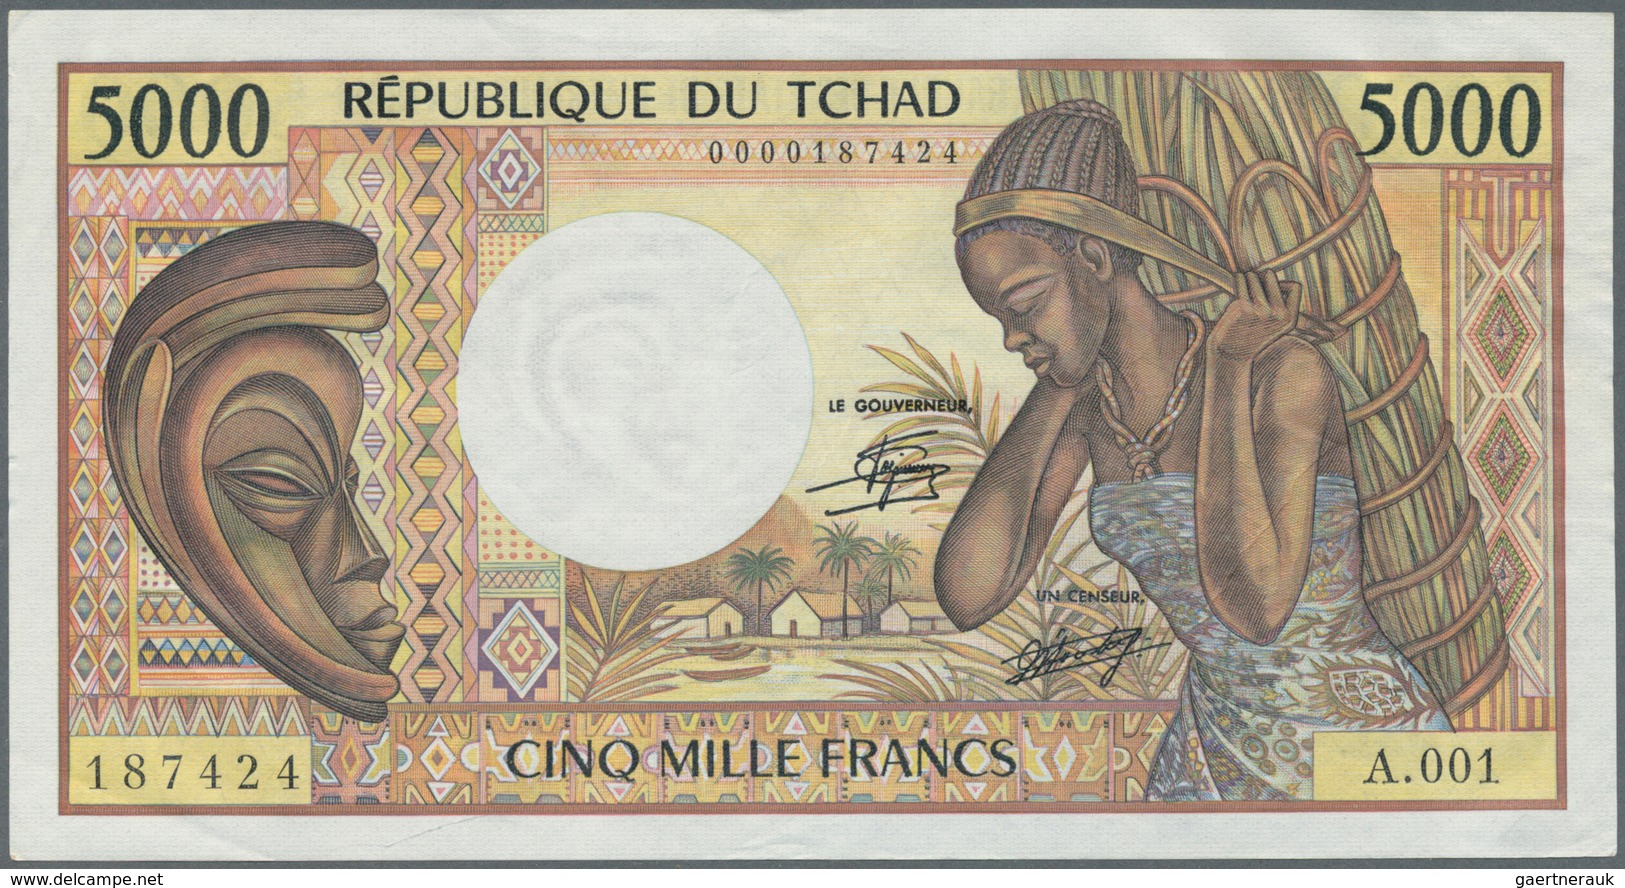 02945 Africa / Afrika: Collectors Book With 60 Banknotes From Equatorial Guinea, Chad And The Central Afri - Other - Africa